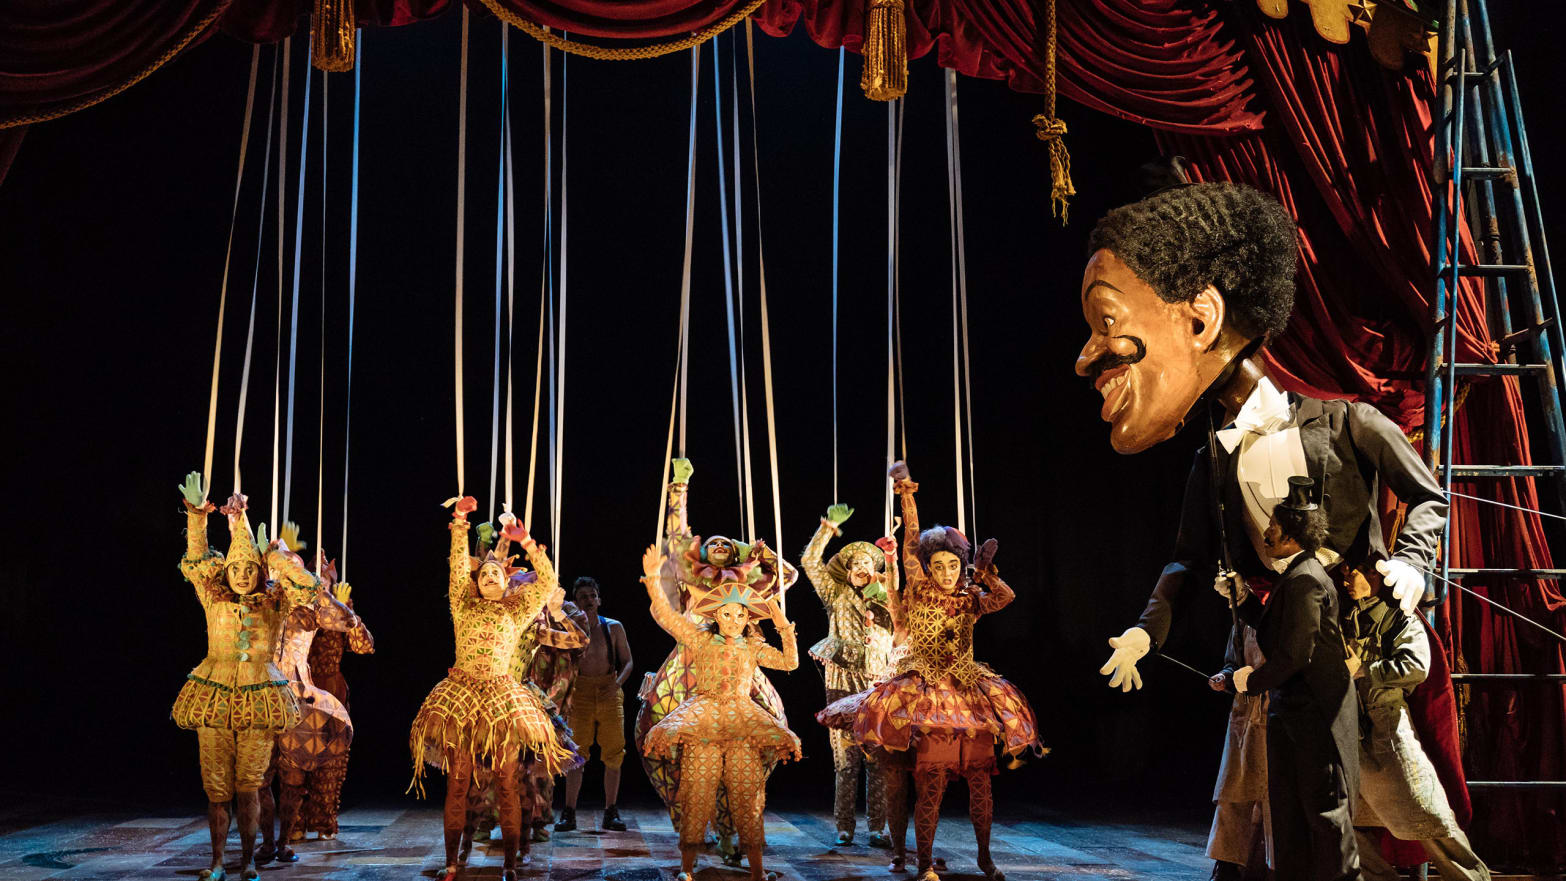 Pinocchio' on Stage: The Best Puppet Show Since 'War Horse